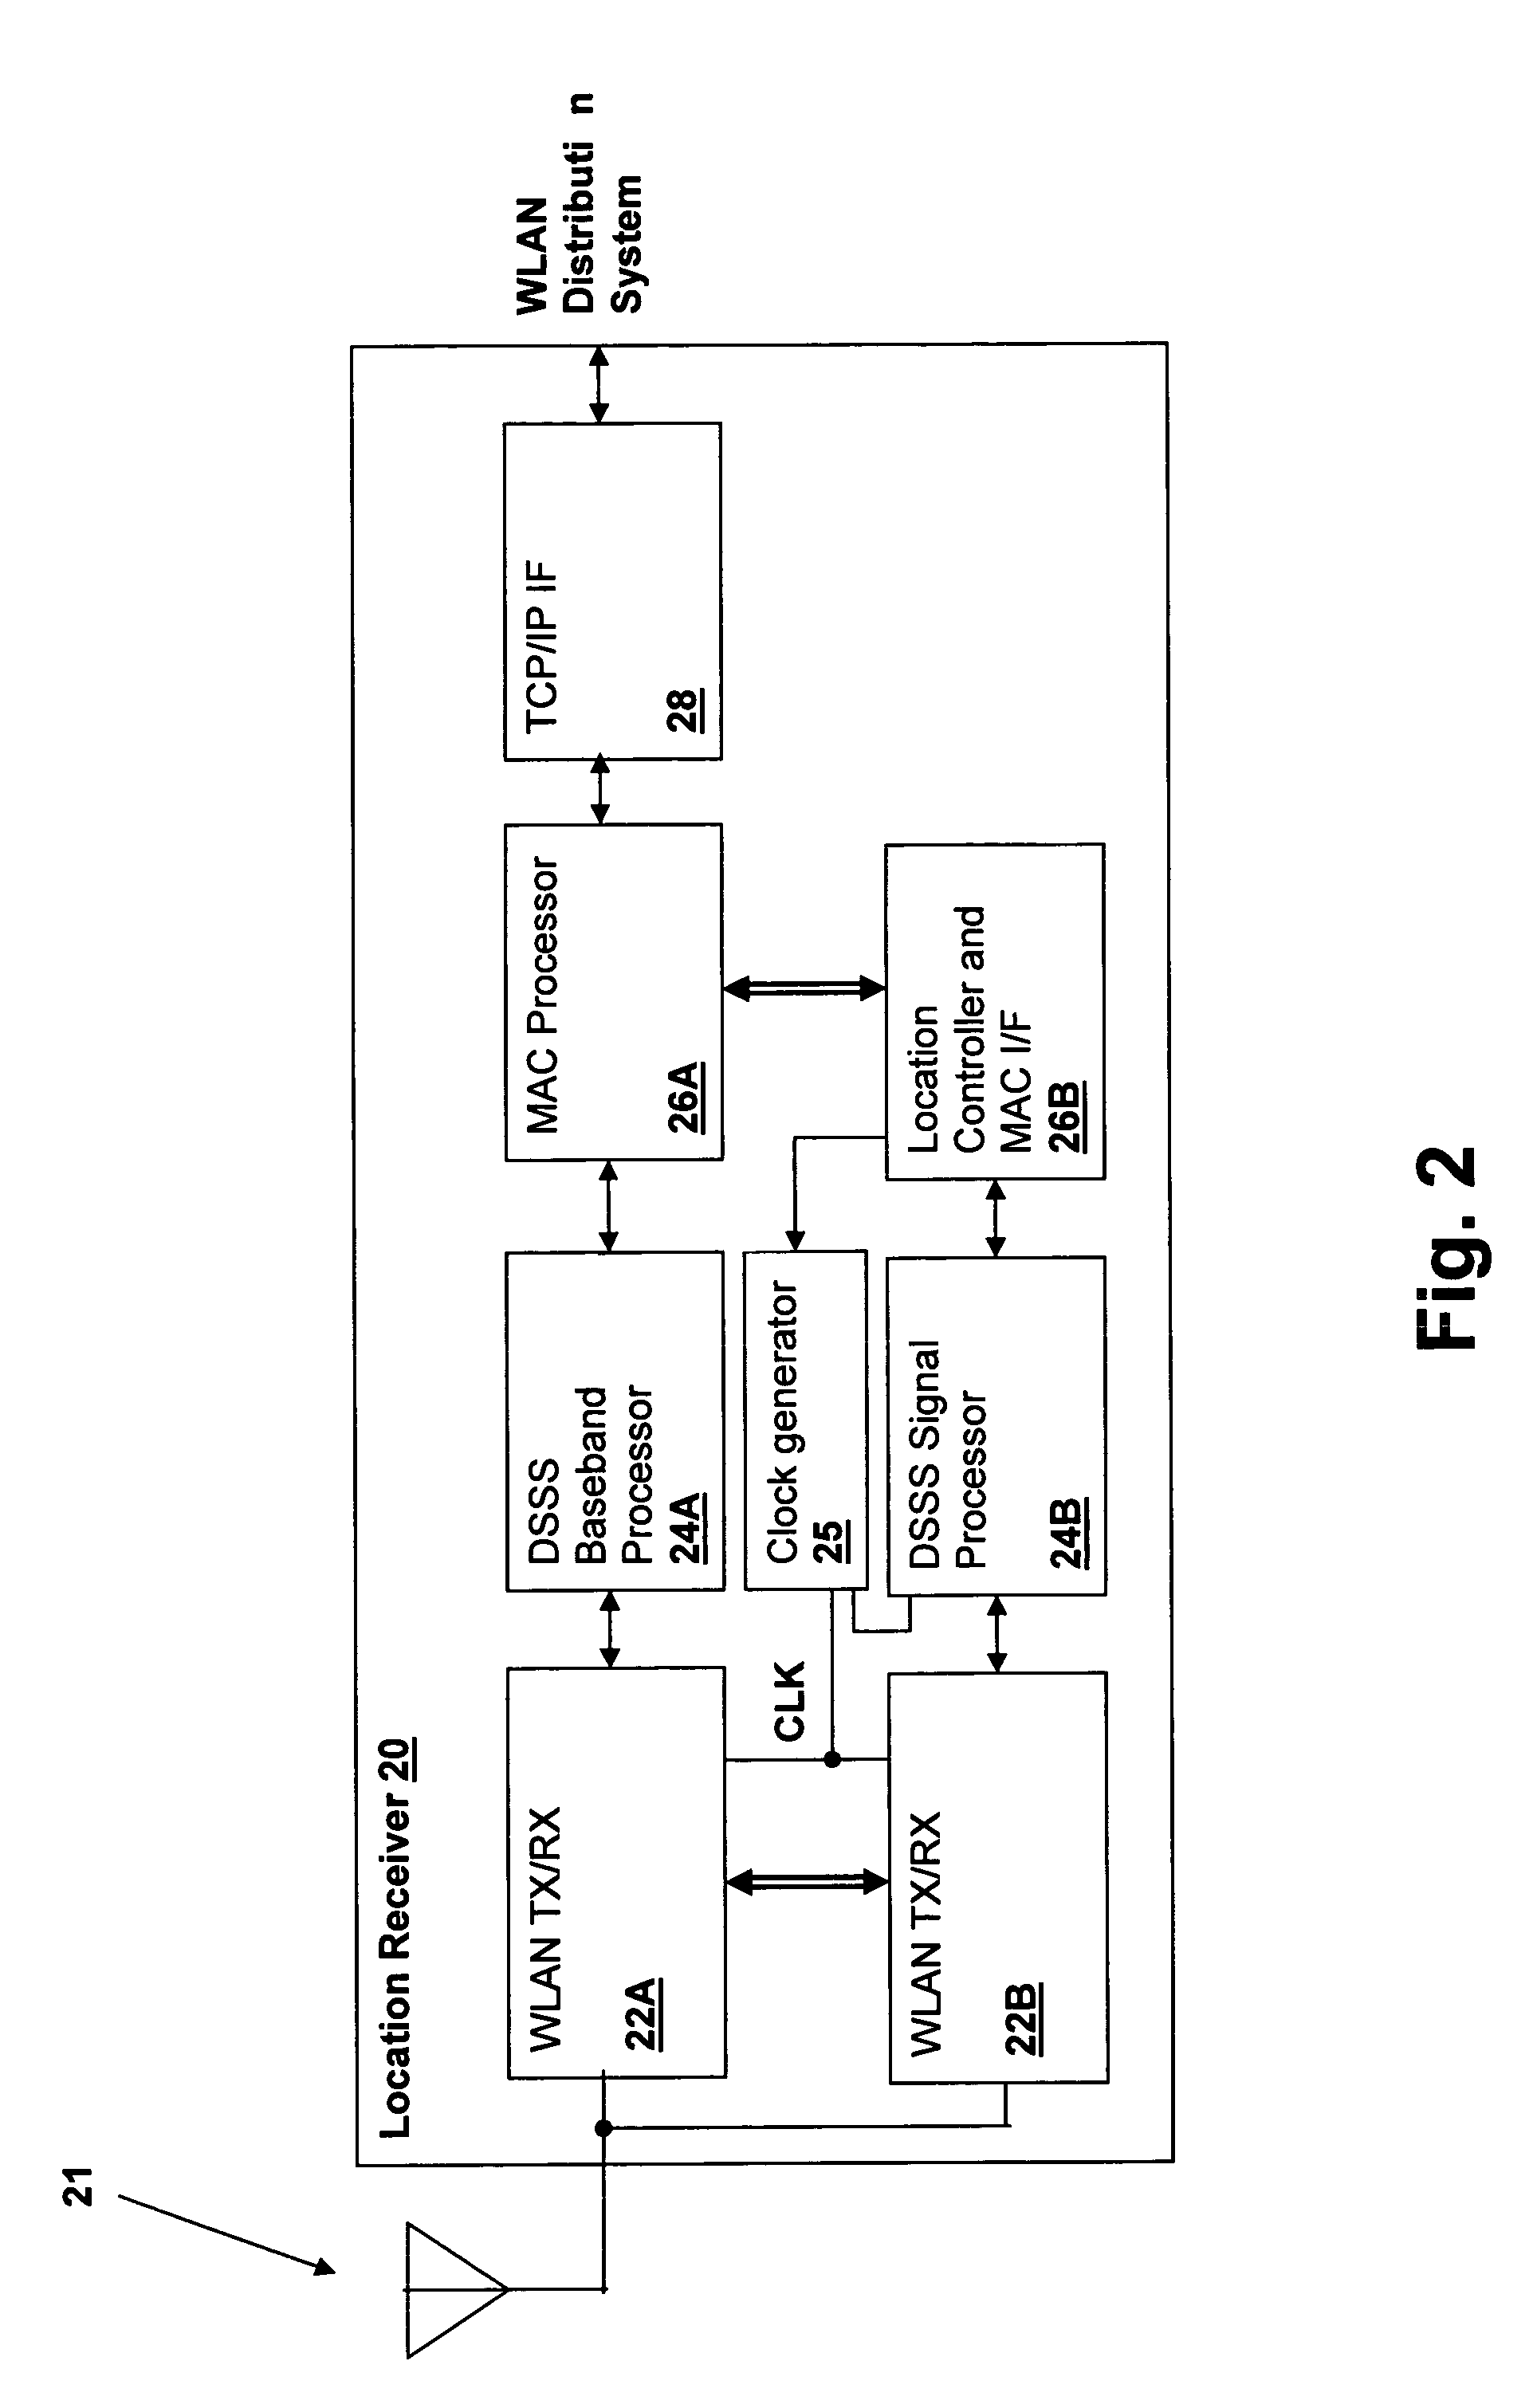 Method and system for synchronizing location finding measurements in a wireless local area network